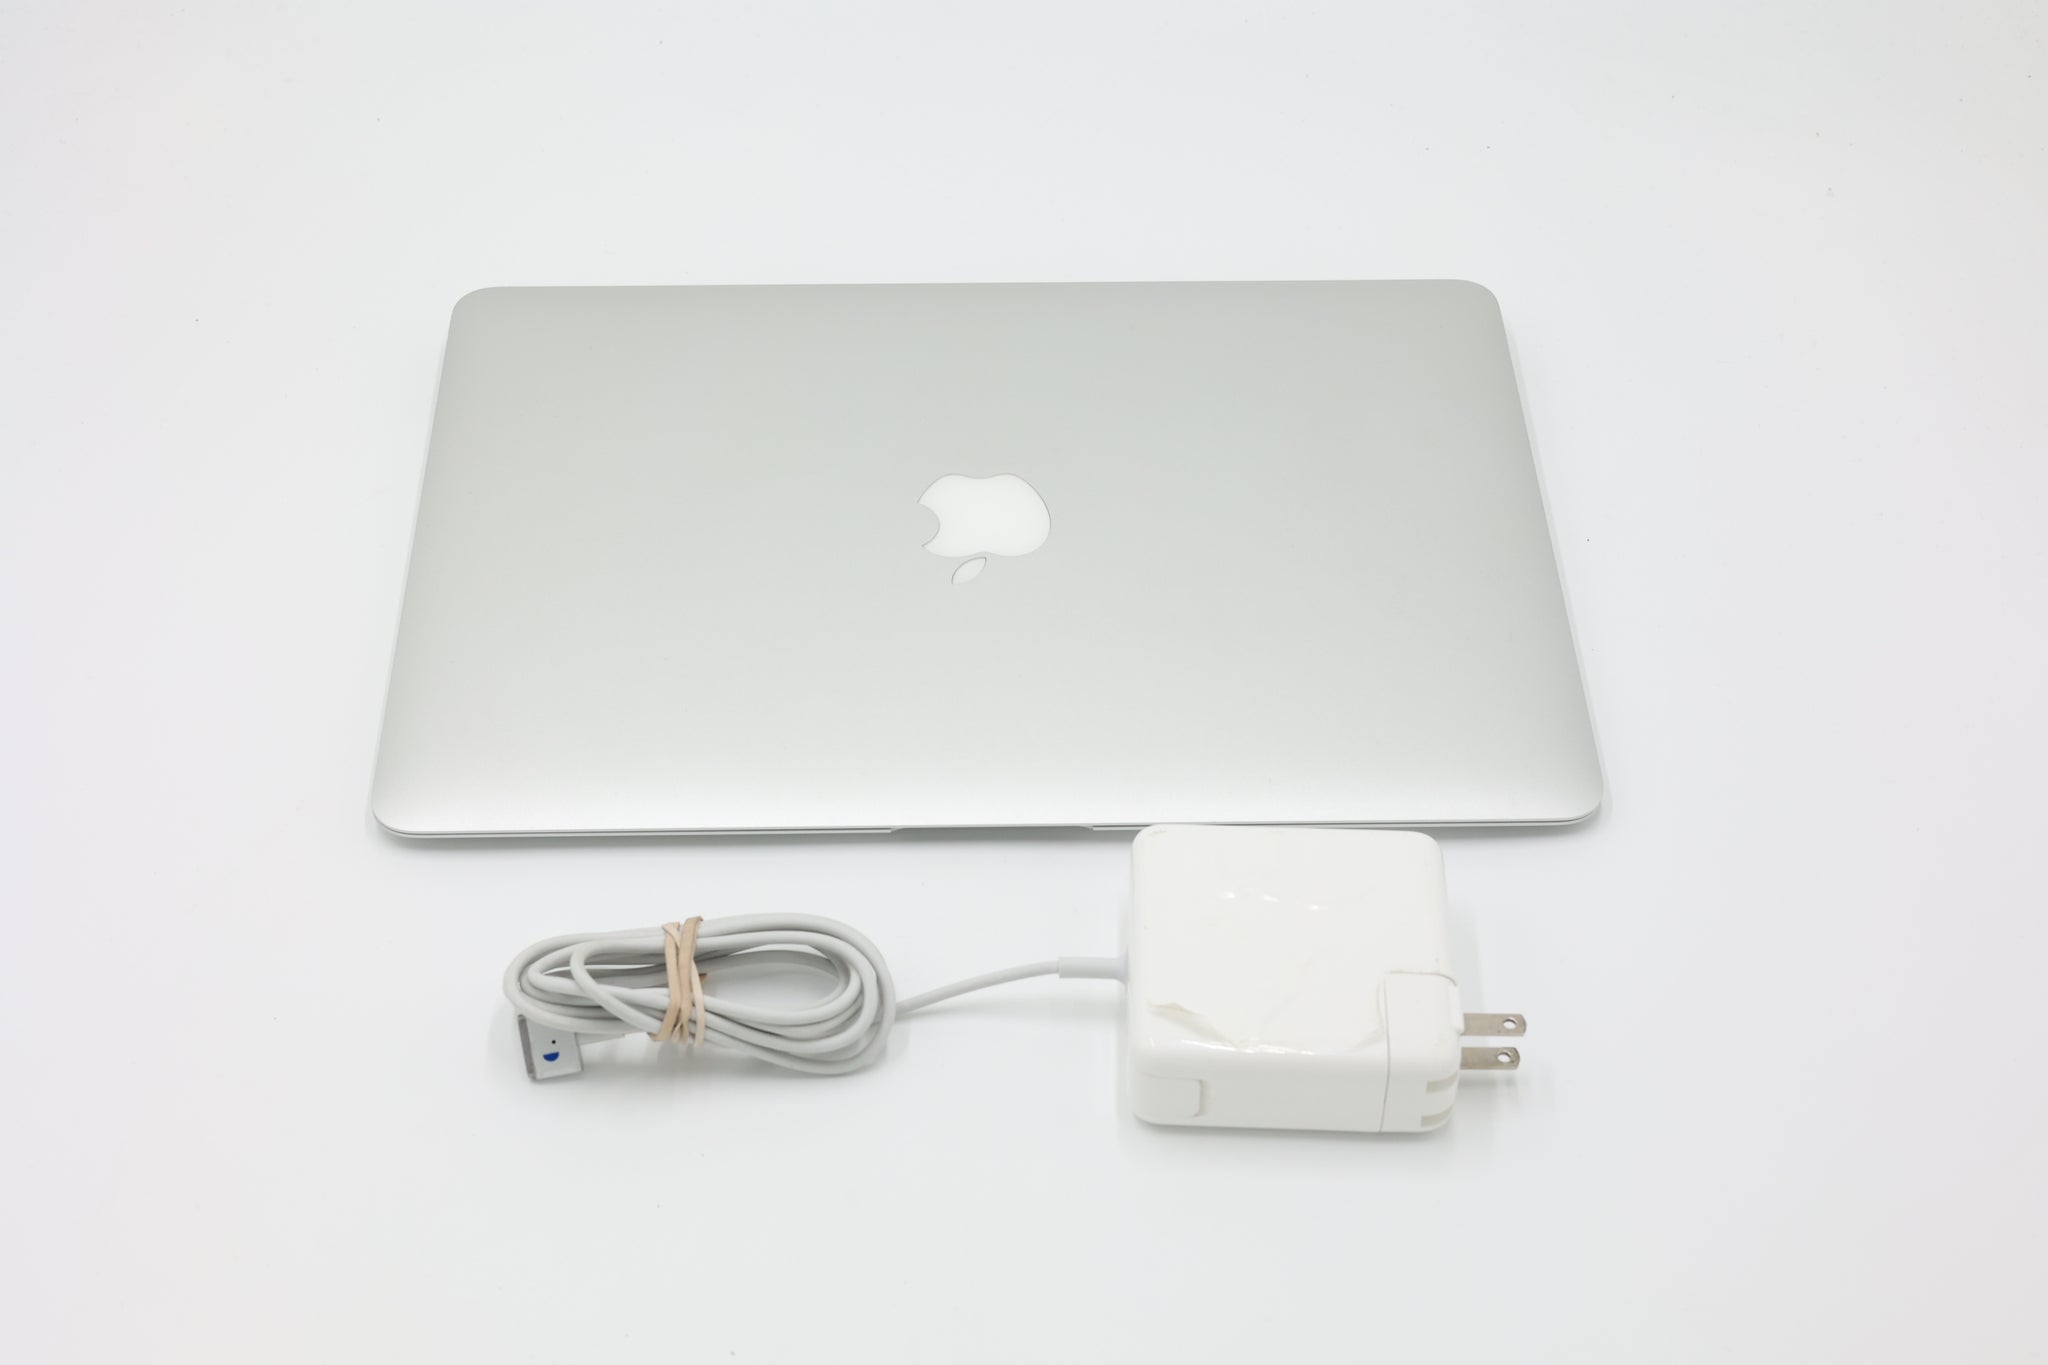 Apple Macbook Air 13 Inch 1.3 GHz i5 4GB (Mid 2013), Used